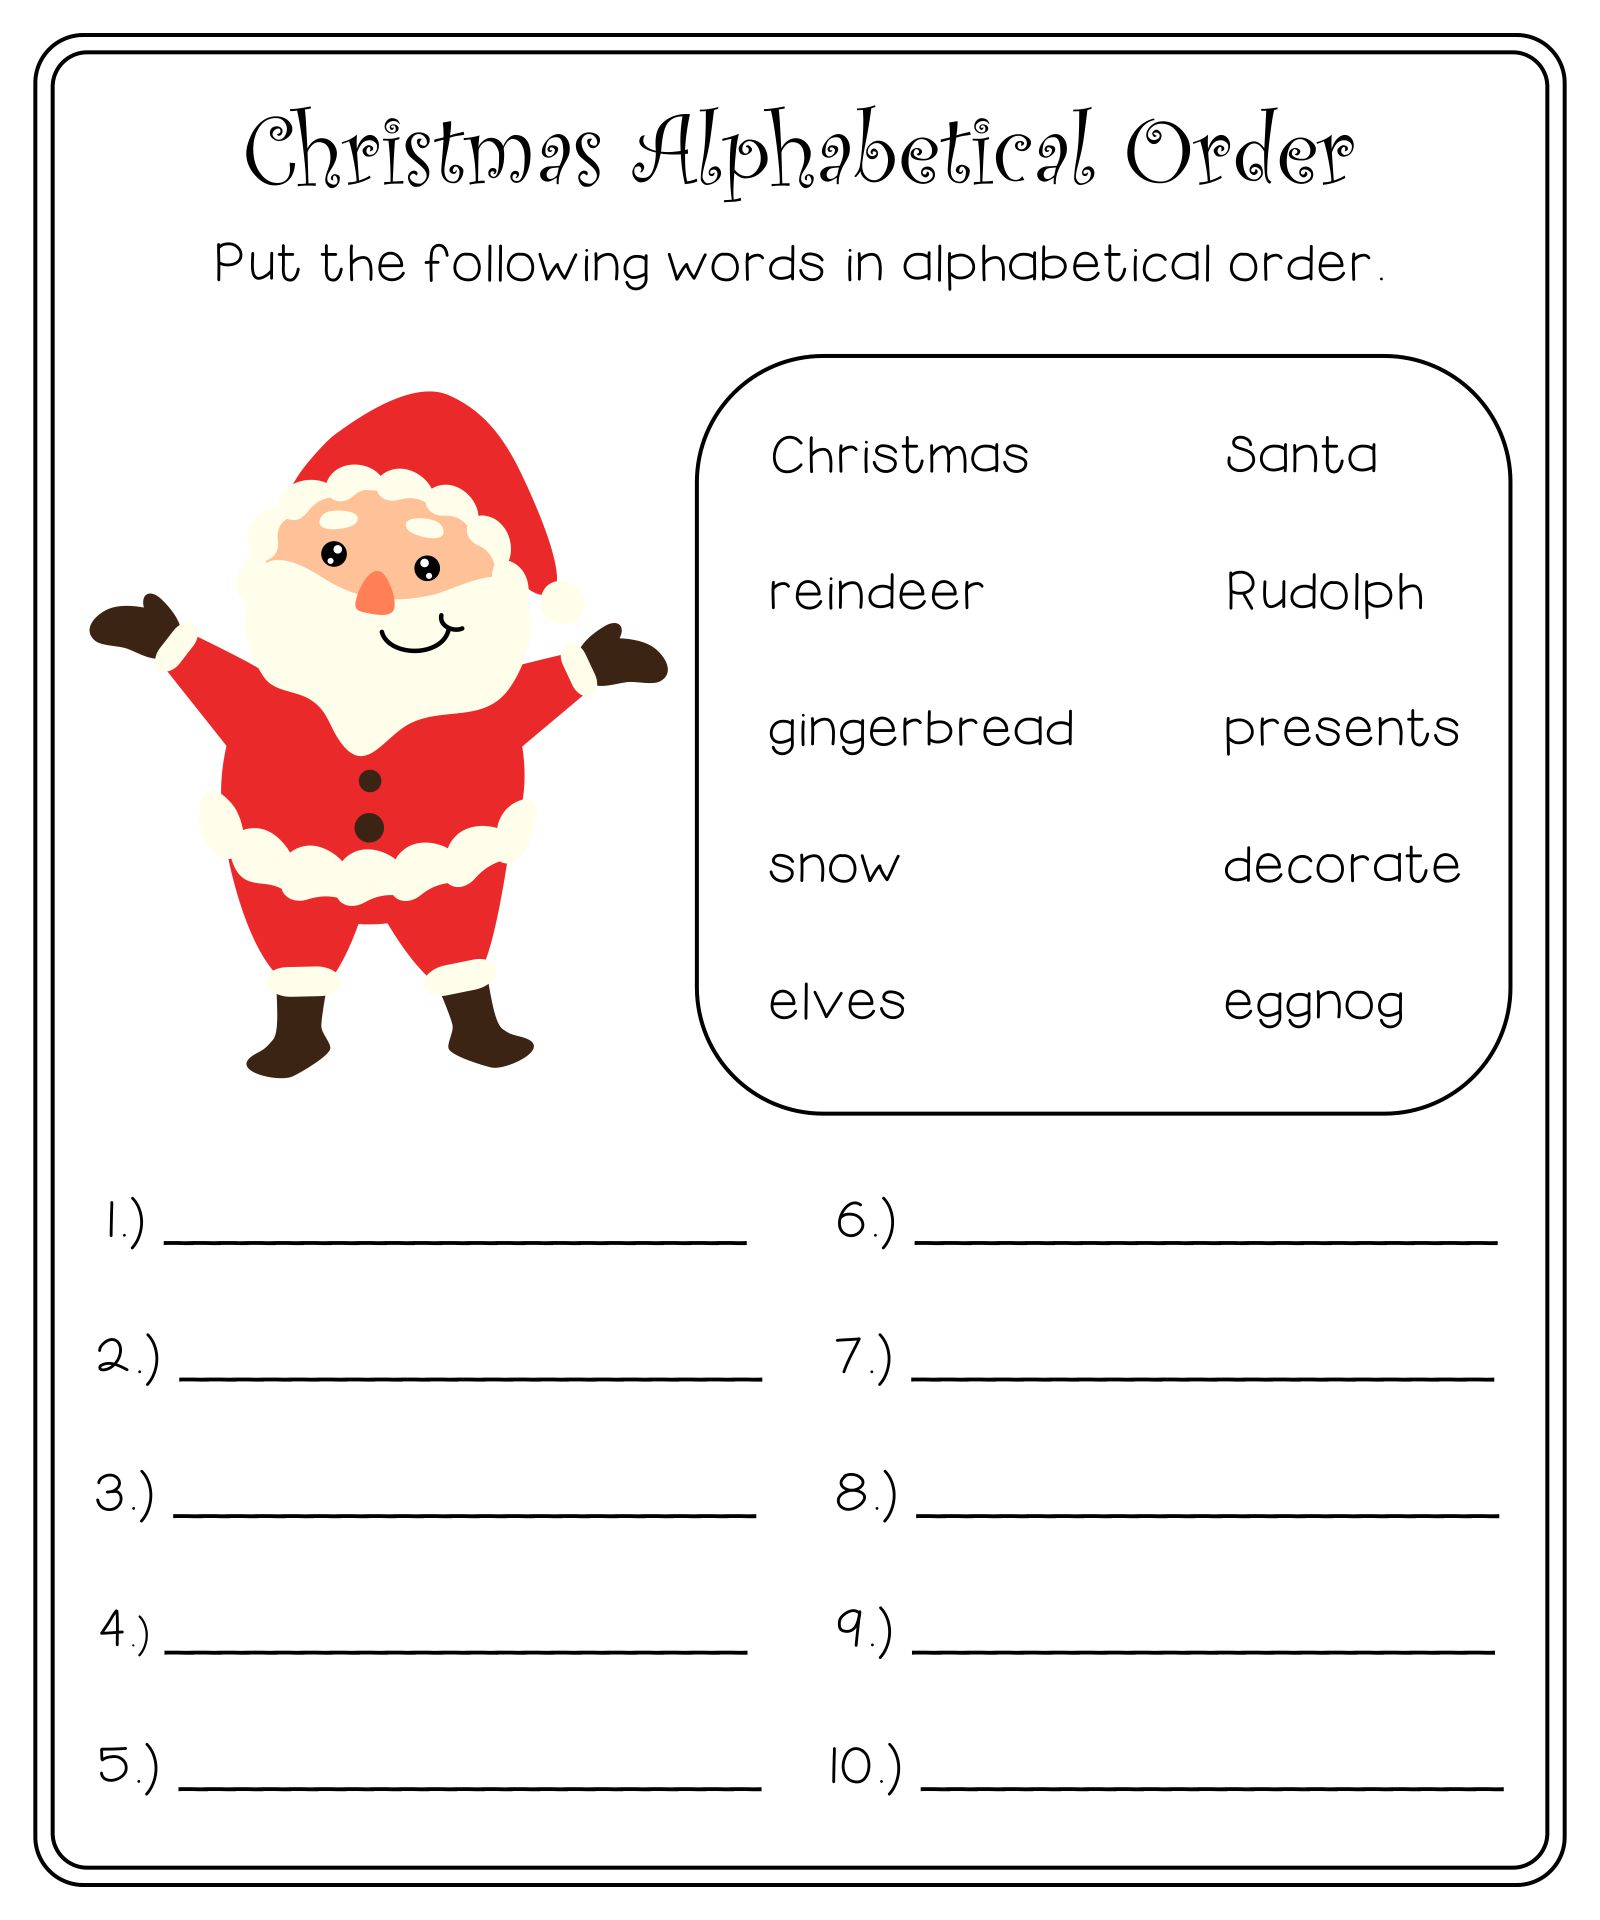 ABC Order Worksheet For First Grade With A Fun Christmas Theme For December Reading Centers